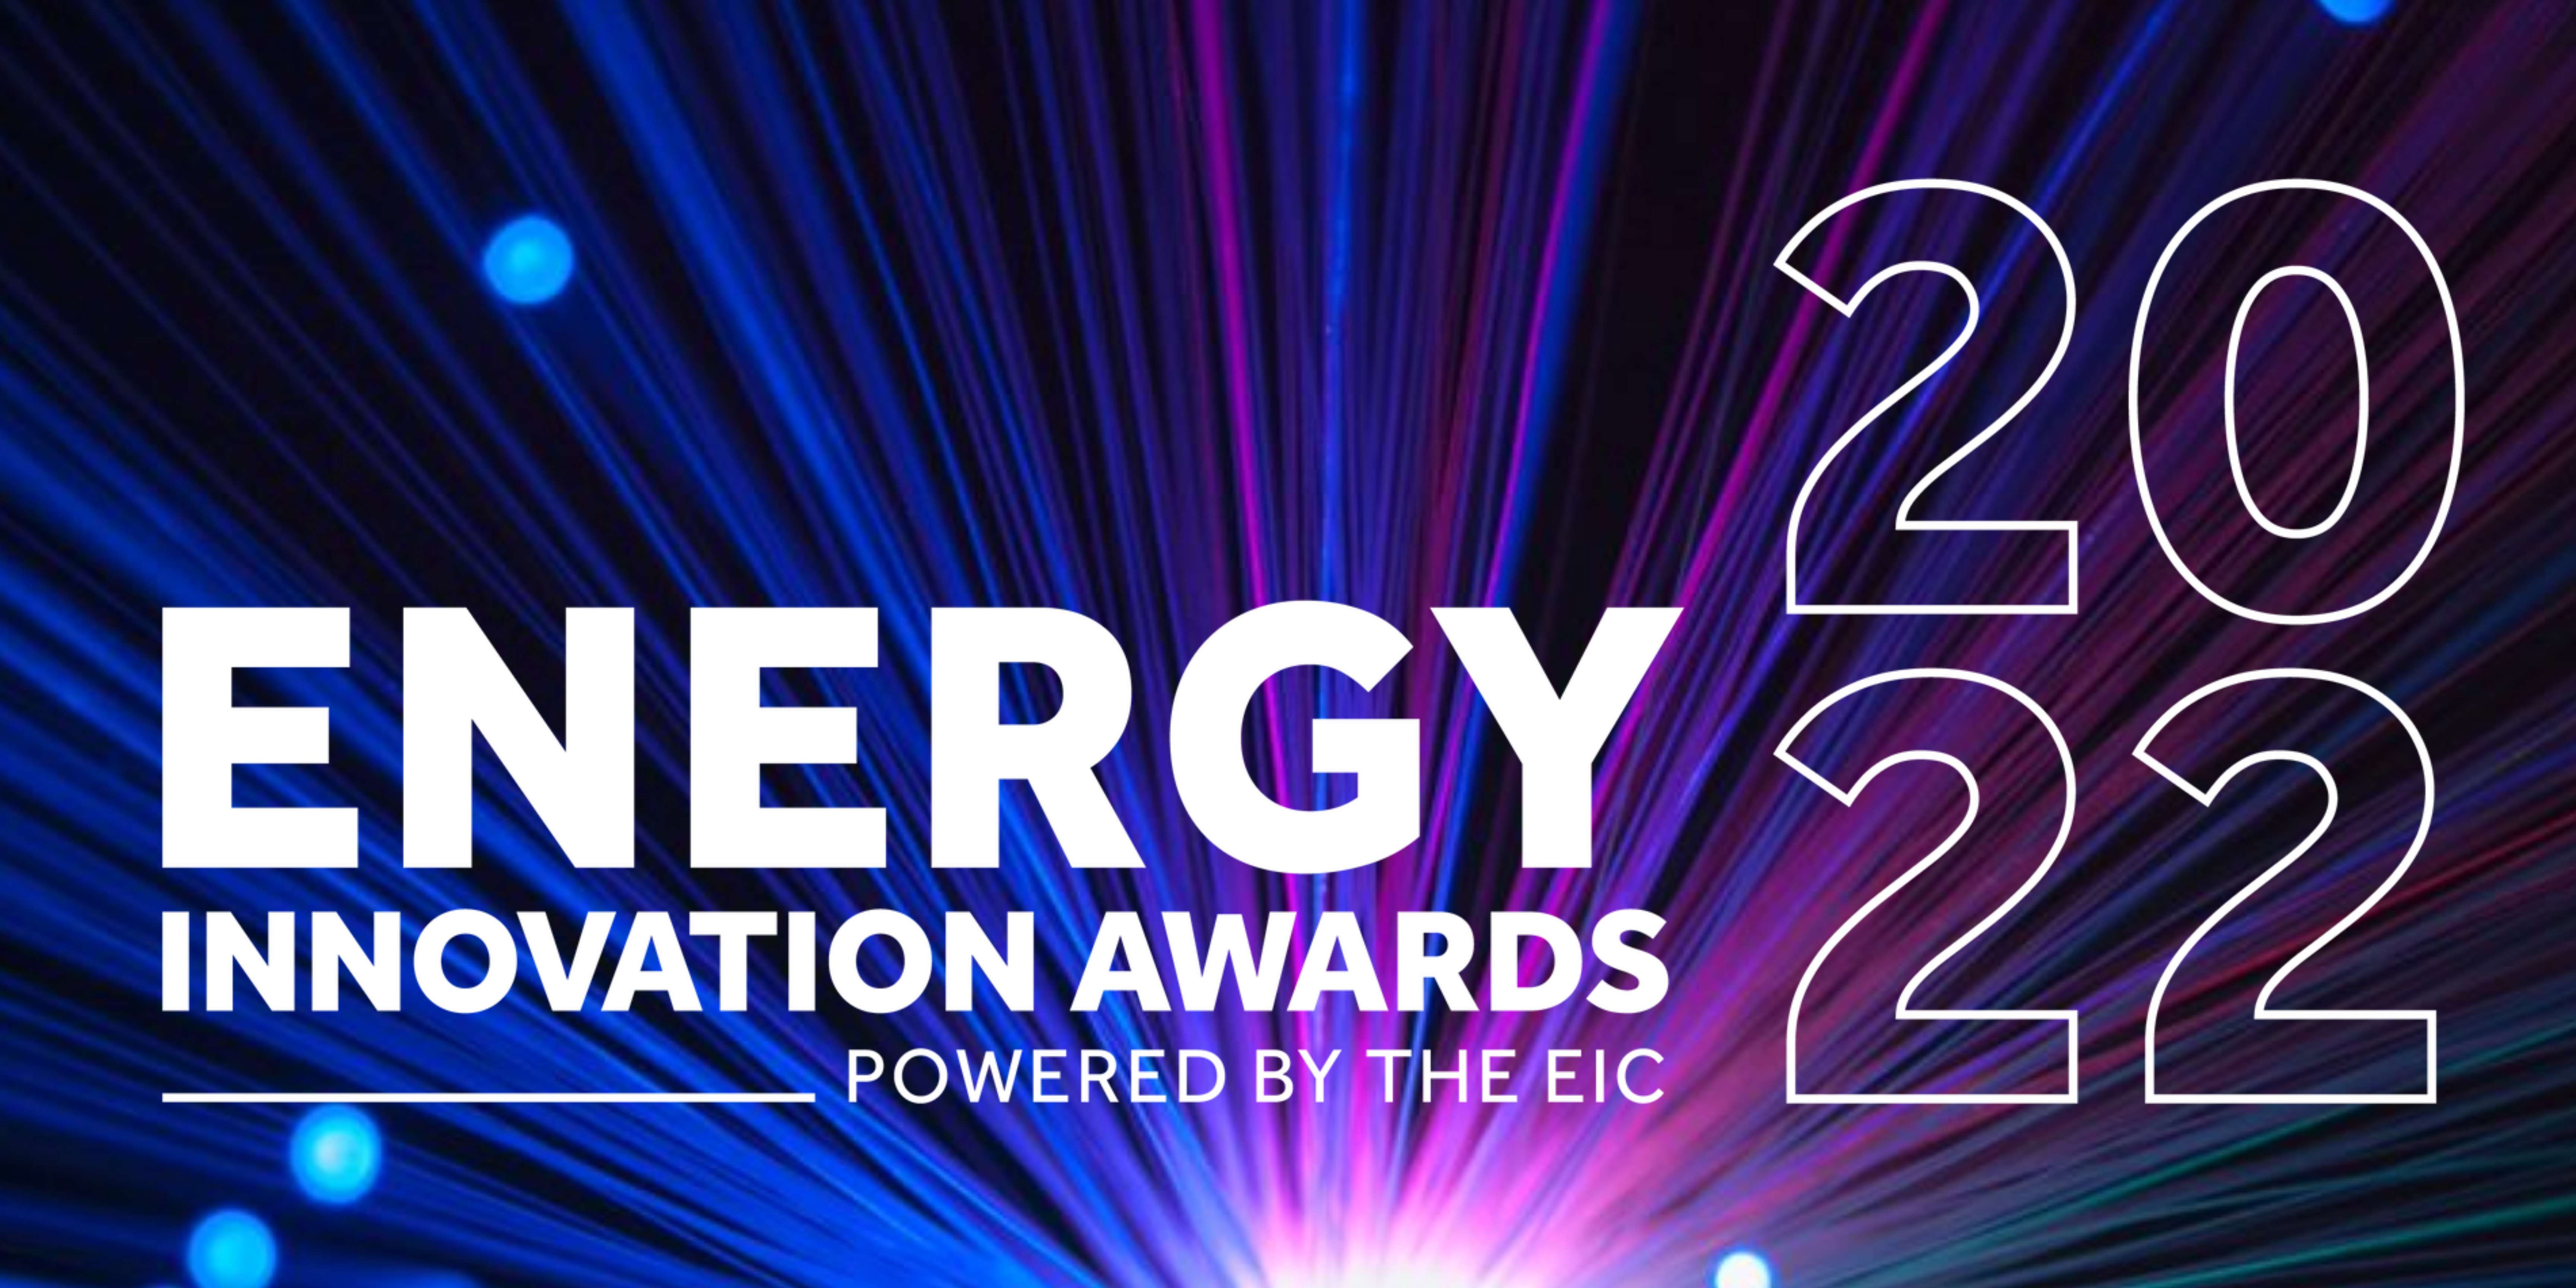 Last chance to enter the Energy Innovation Awards